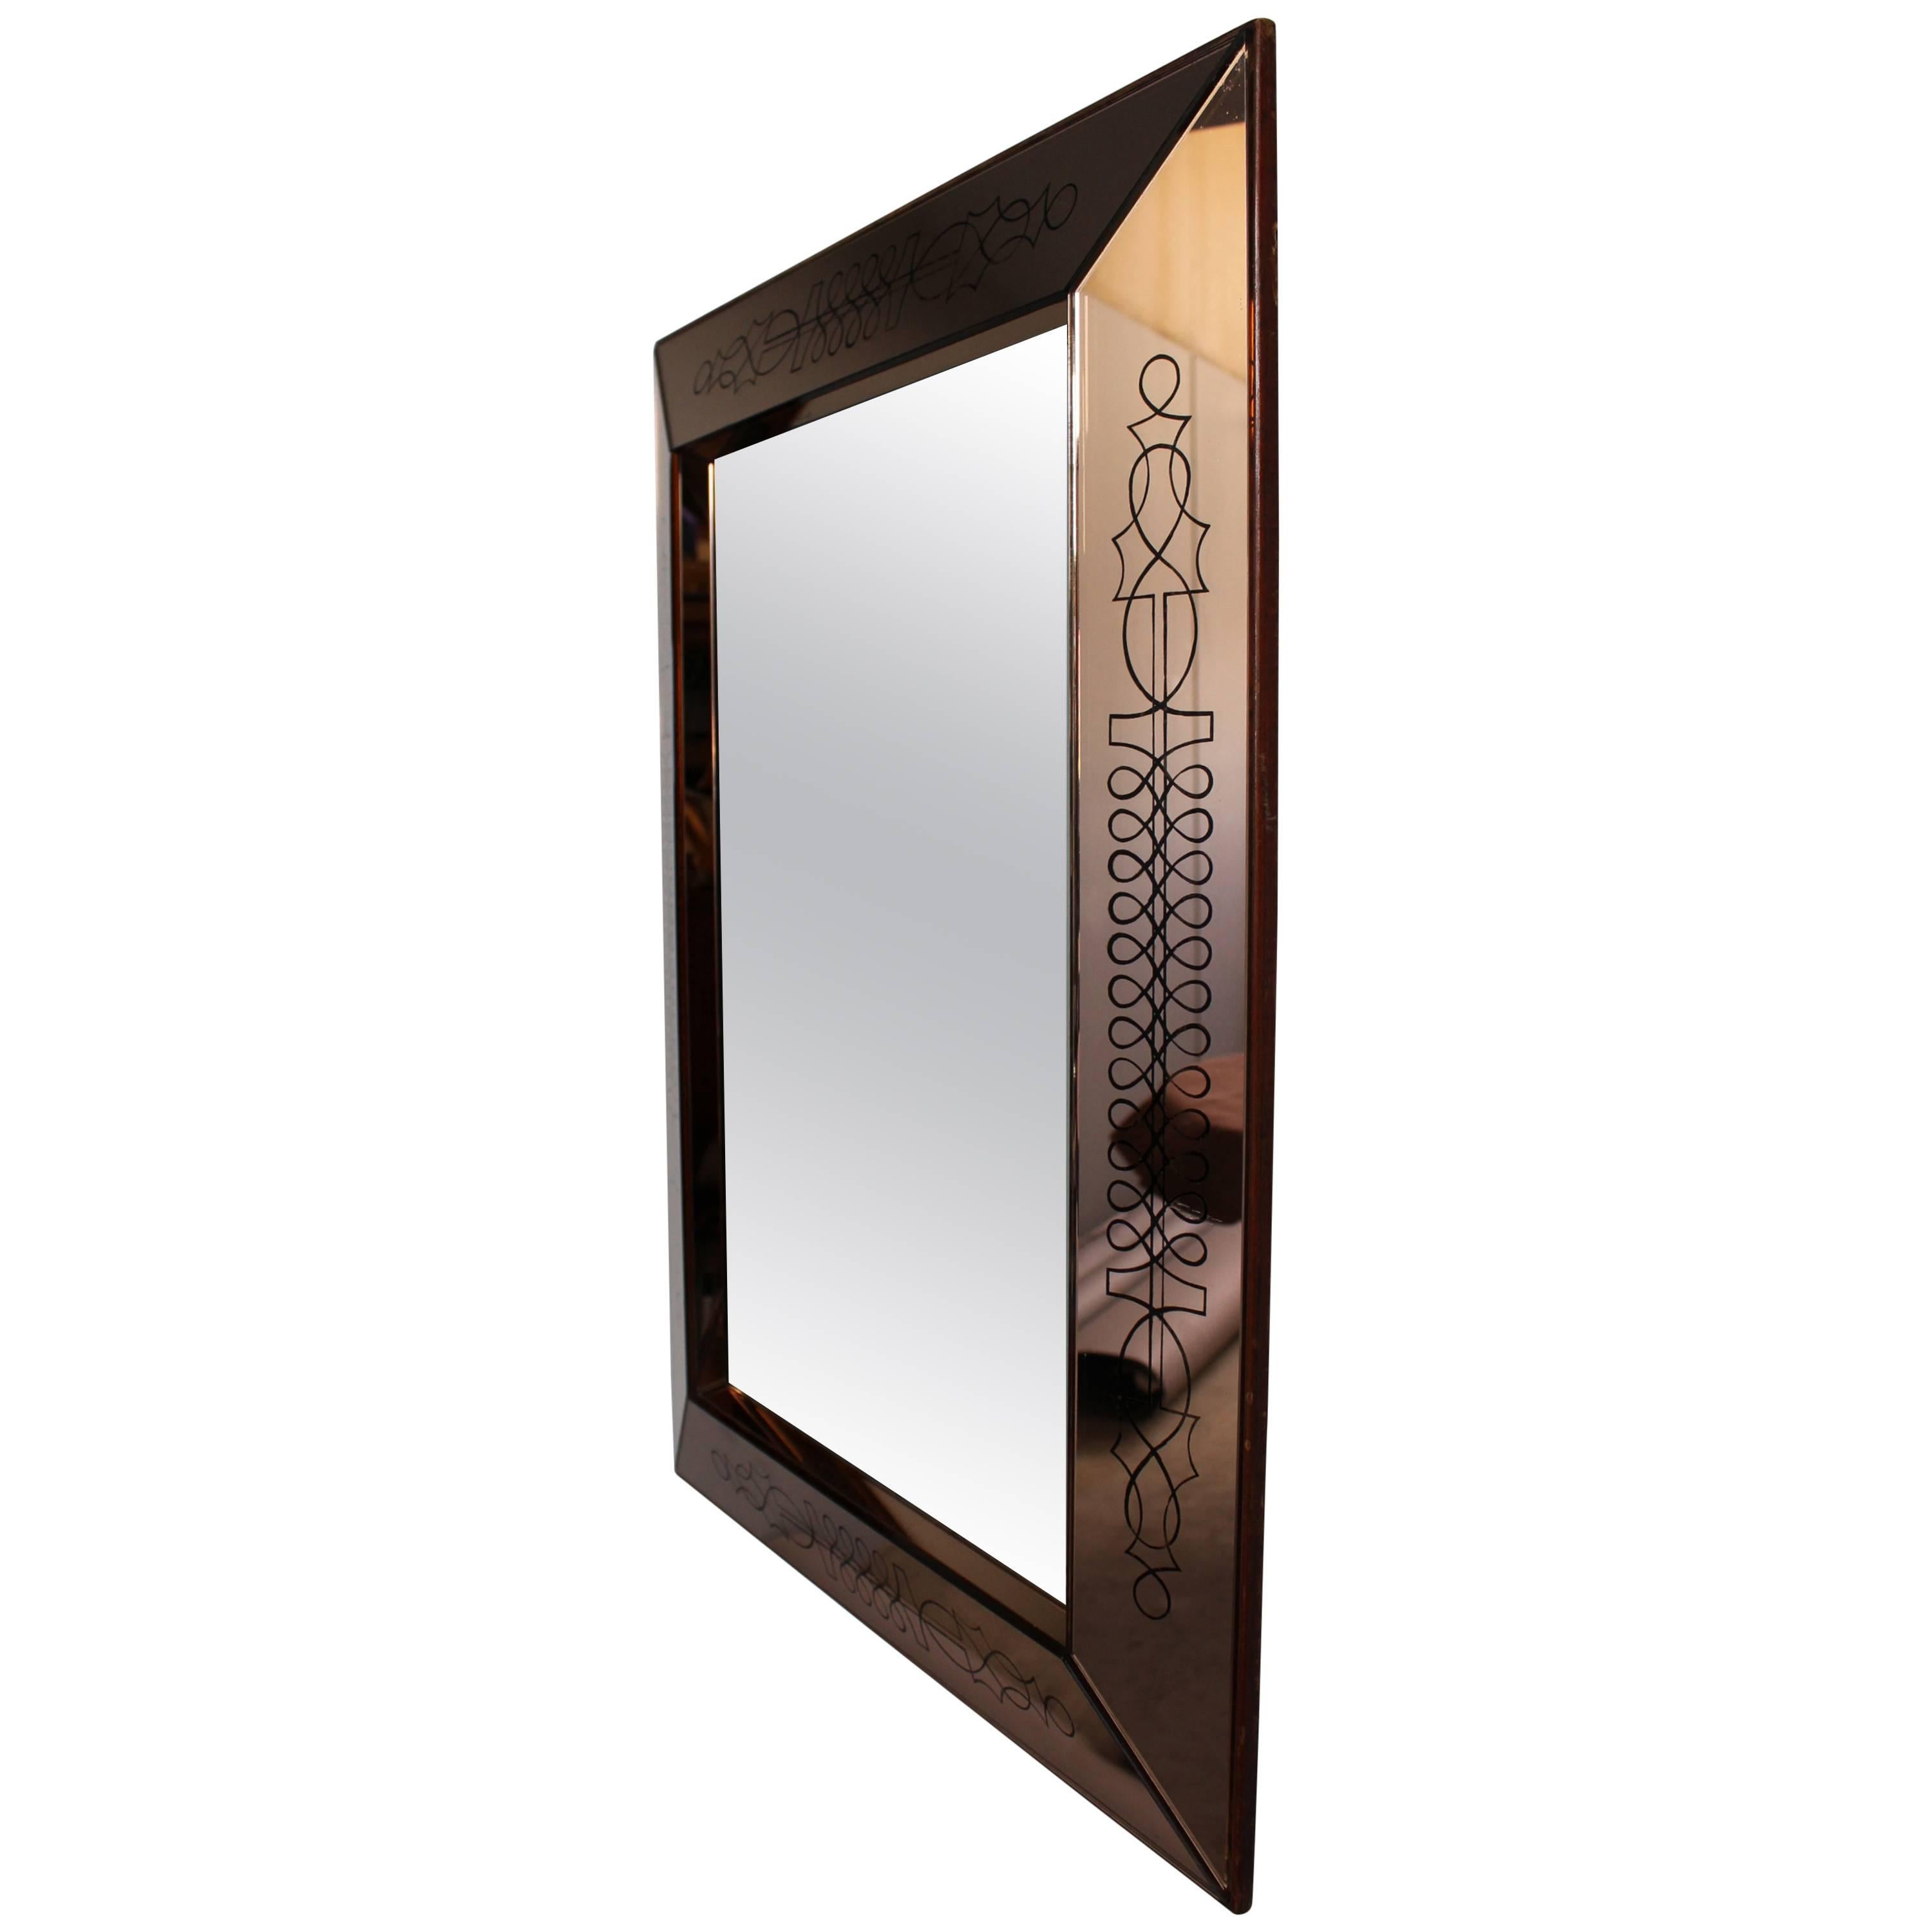 A Fine French Art Deco Rectangular Mirror by Max Ingrand For Sale